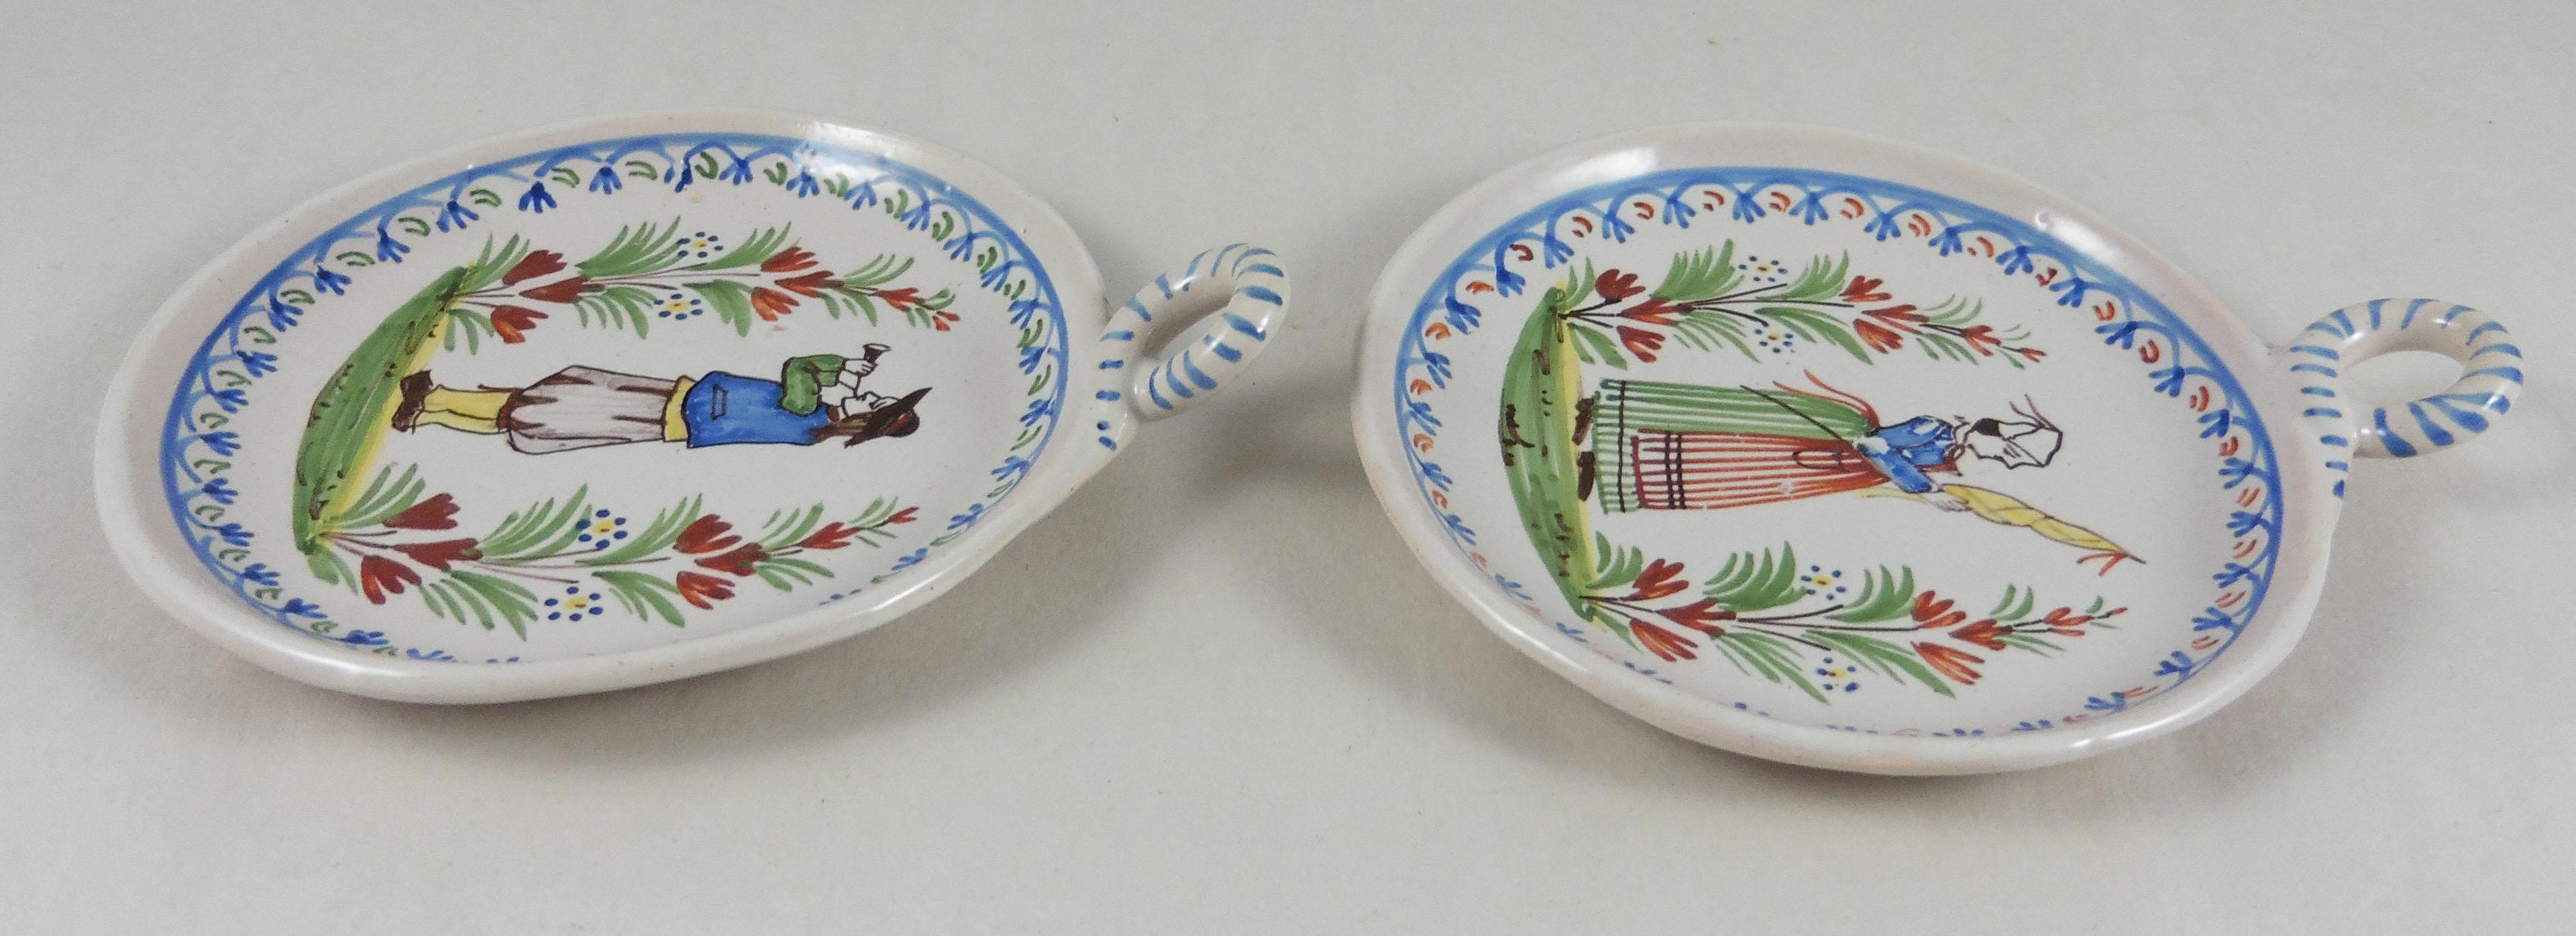 Pair of antique faience handled medallions signed 